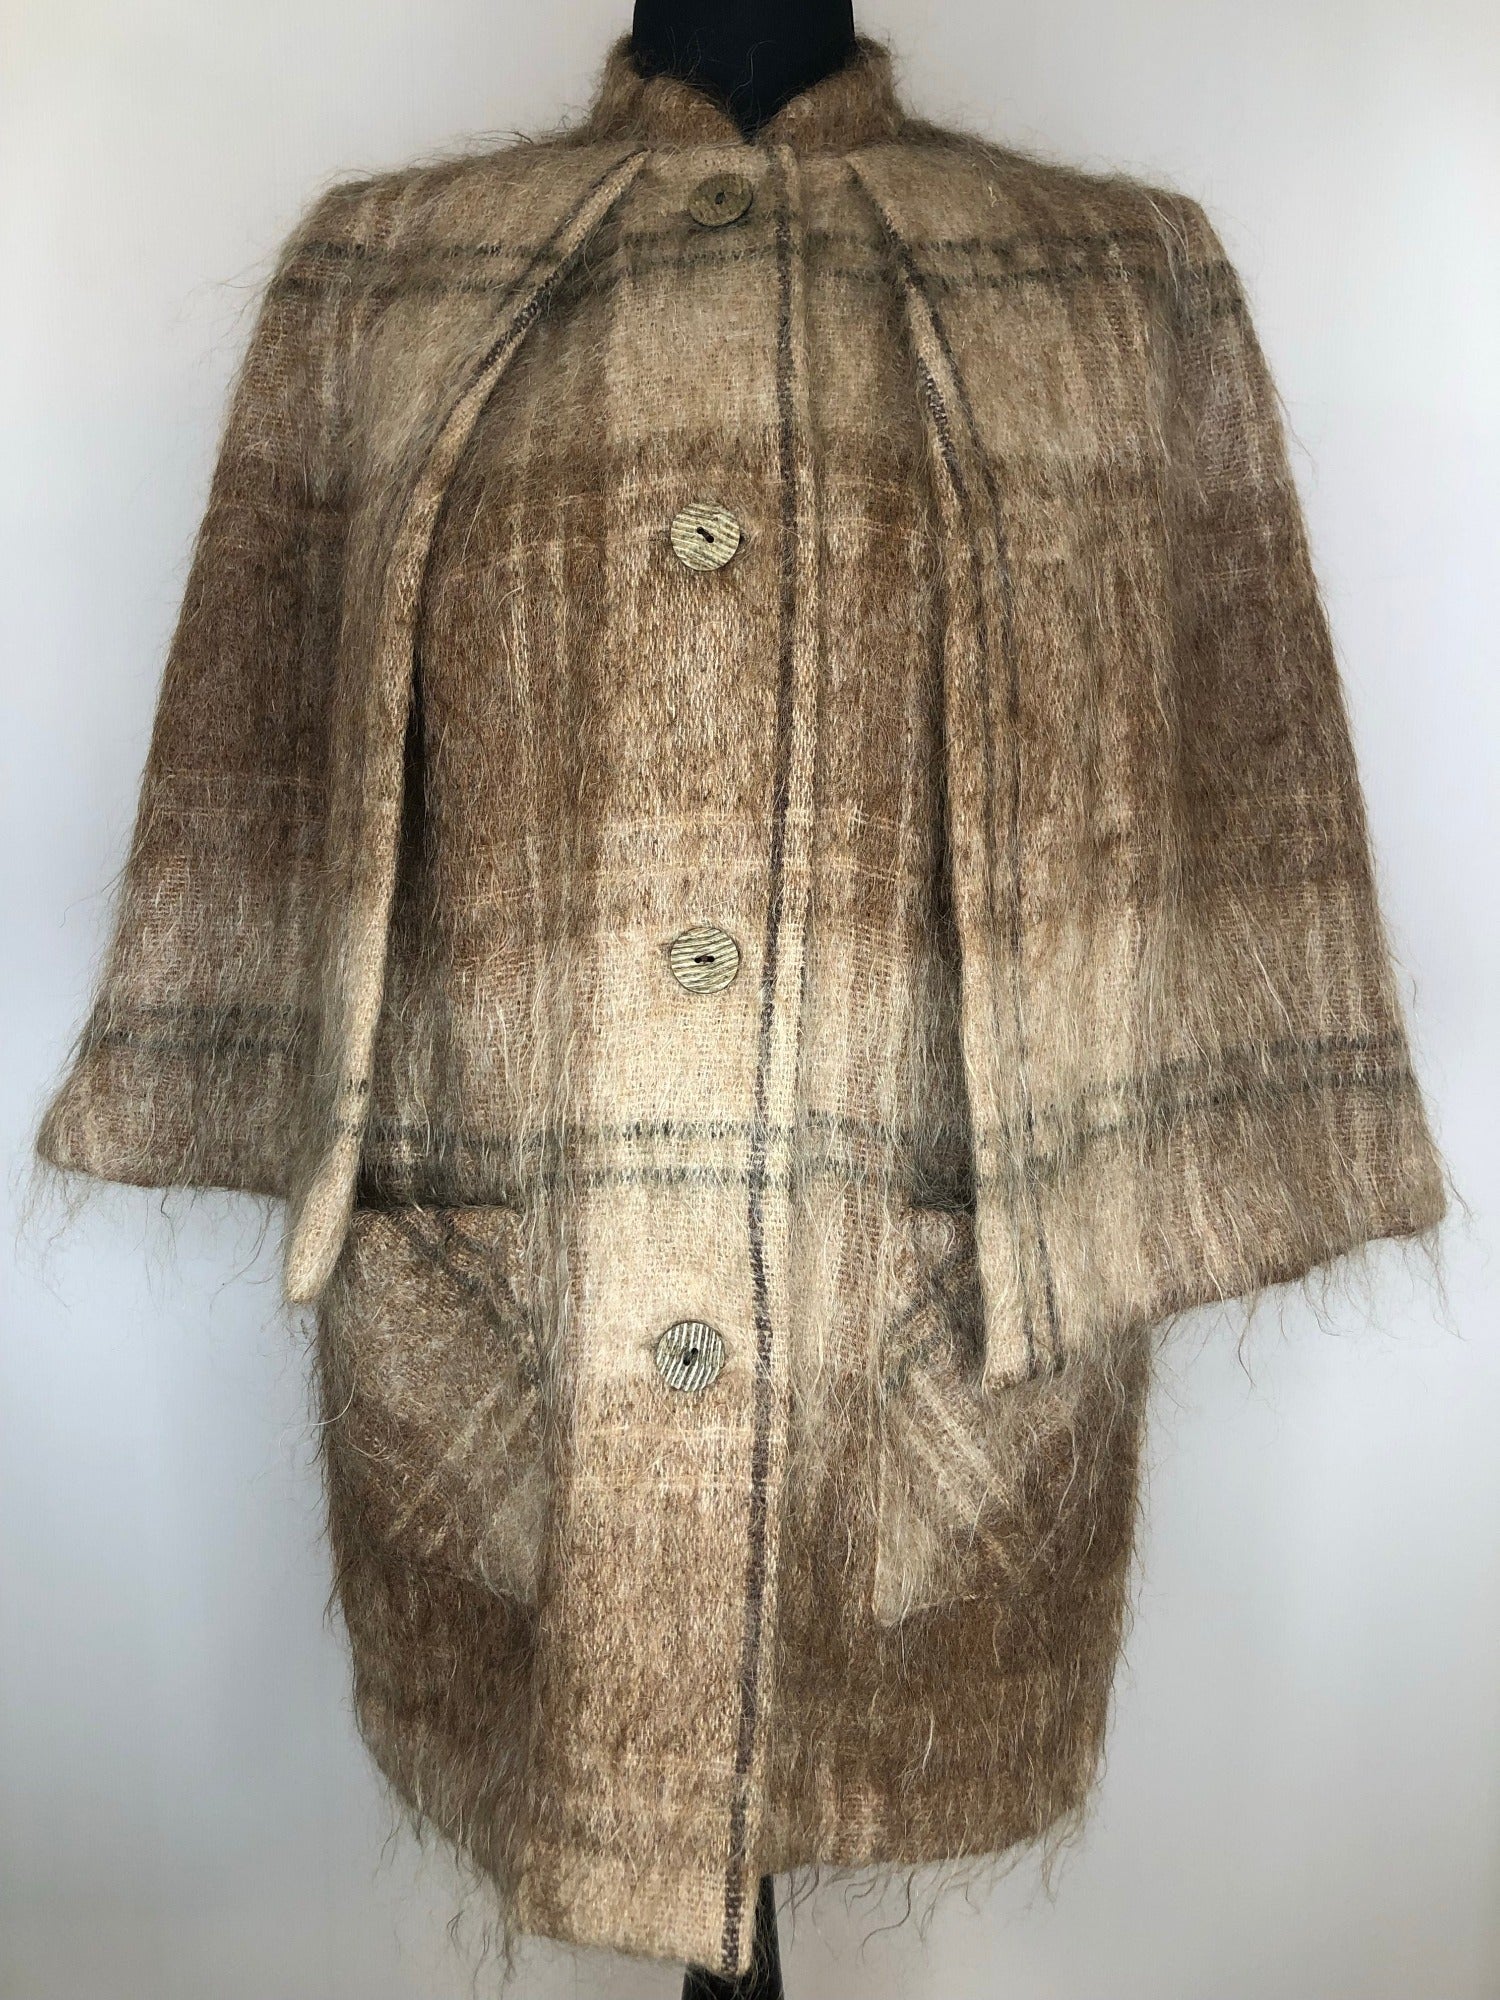 wool  womens  waistcoat  vintage  Urban Village Vintage  tunic  checked  check  cape  brown  60s  1960s  16